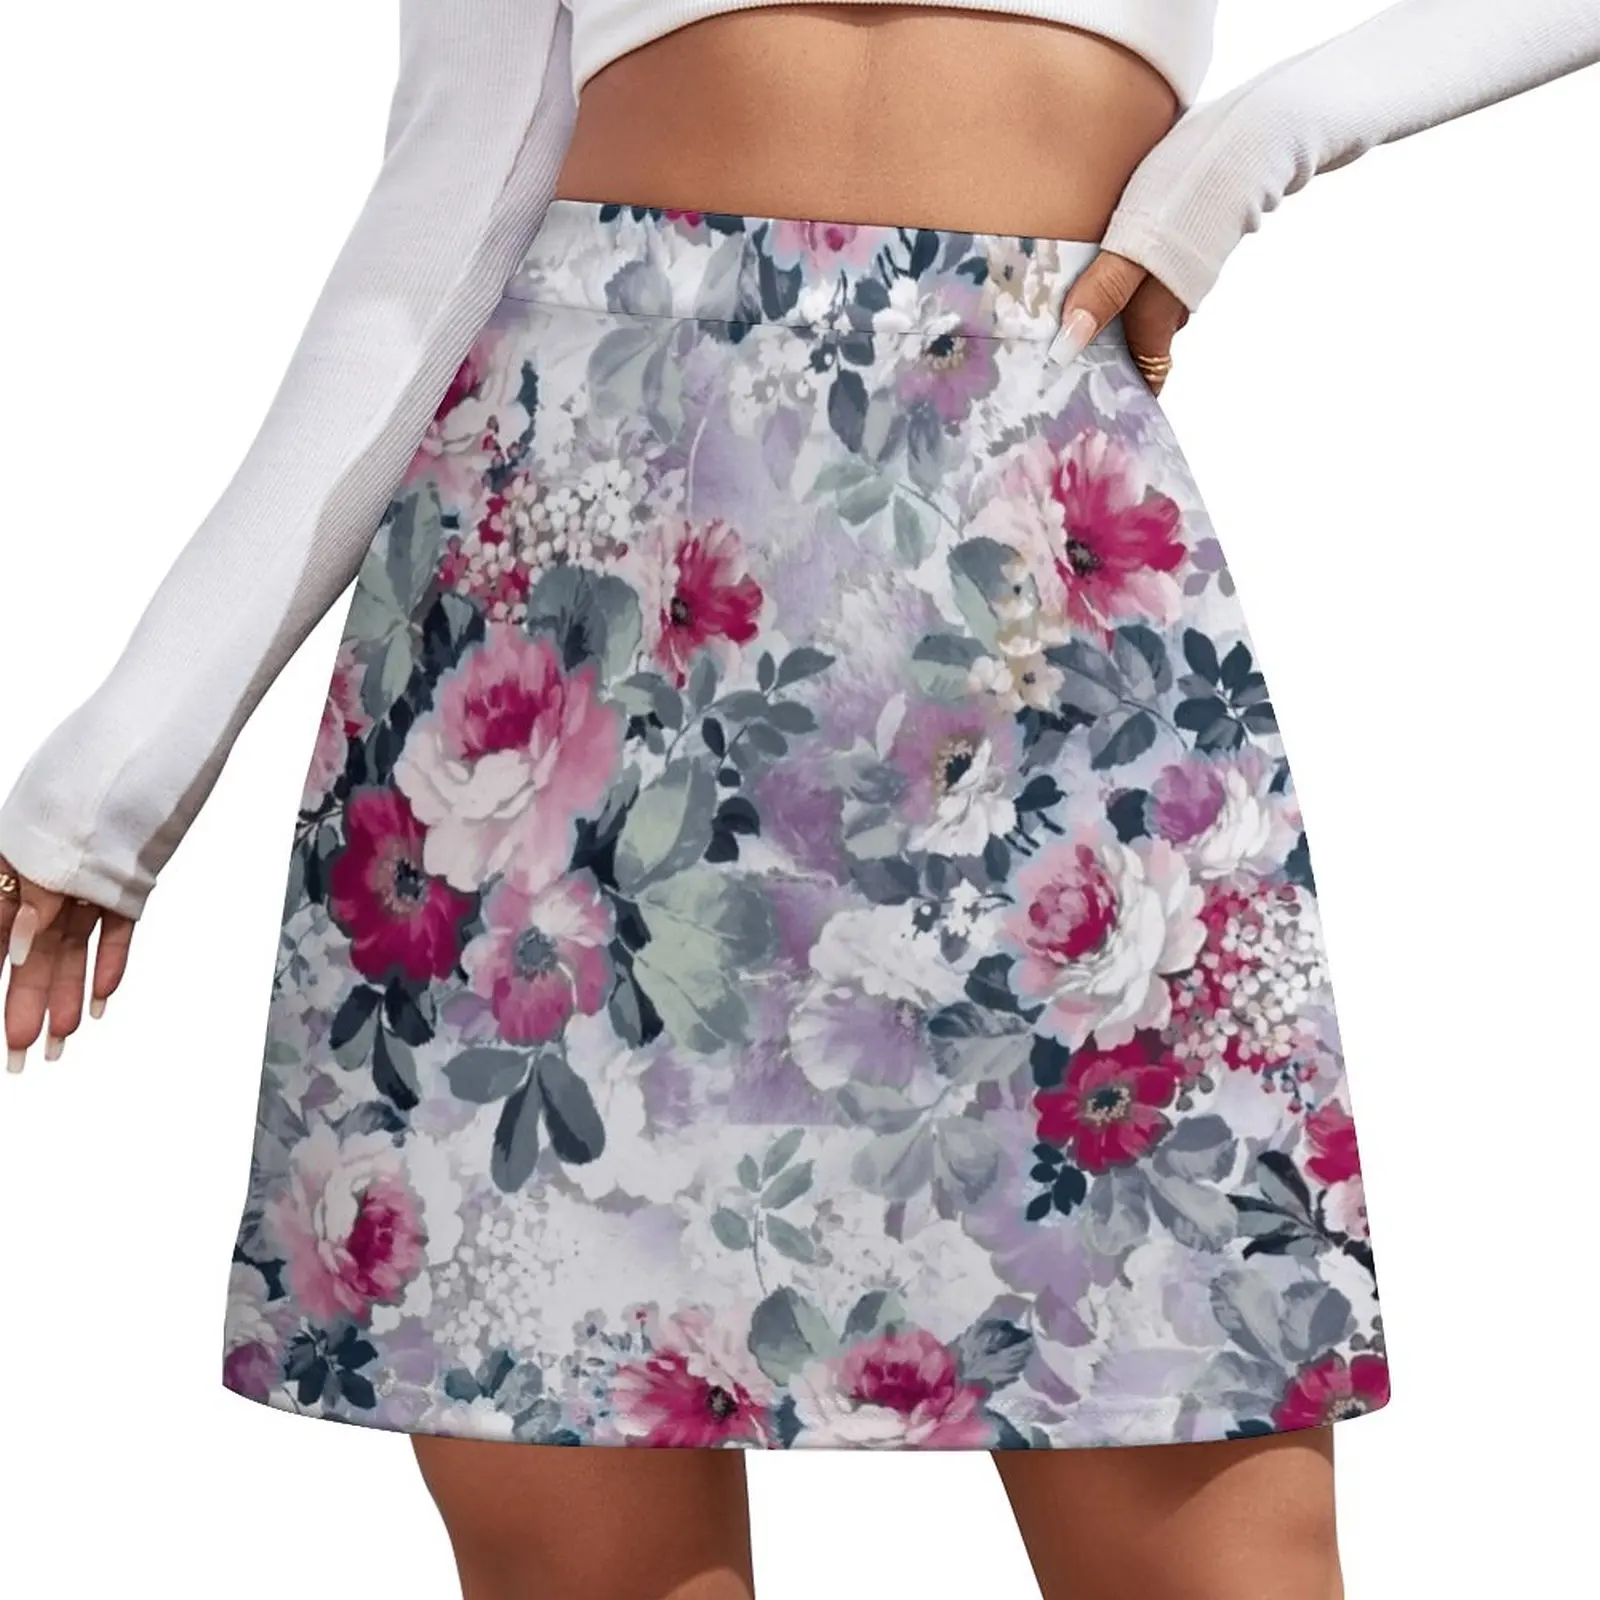 Beautiful Flowers Mini Skirt Clothes for summer Miniskirt Evening dresses rave outfits for women